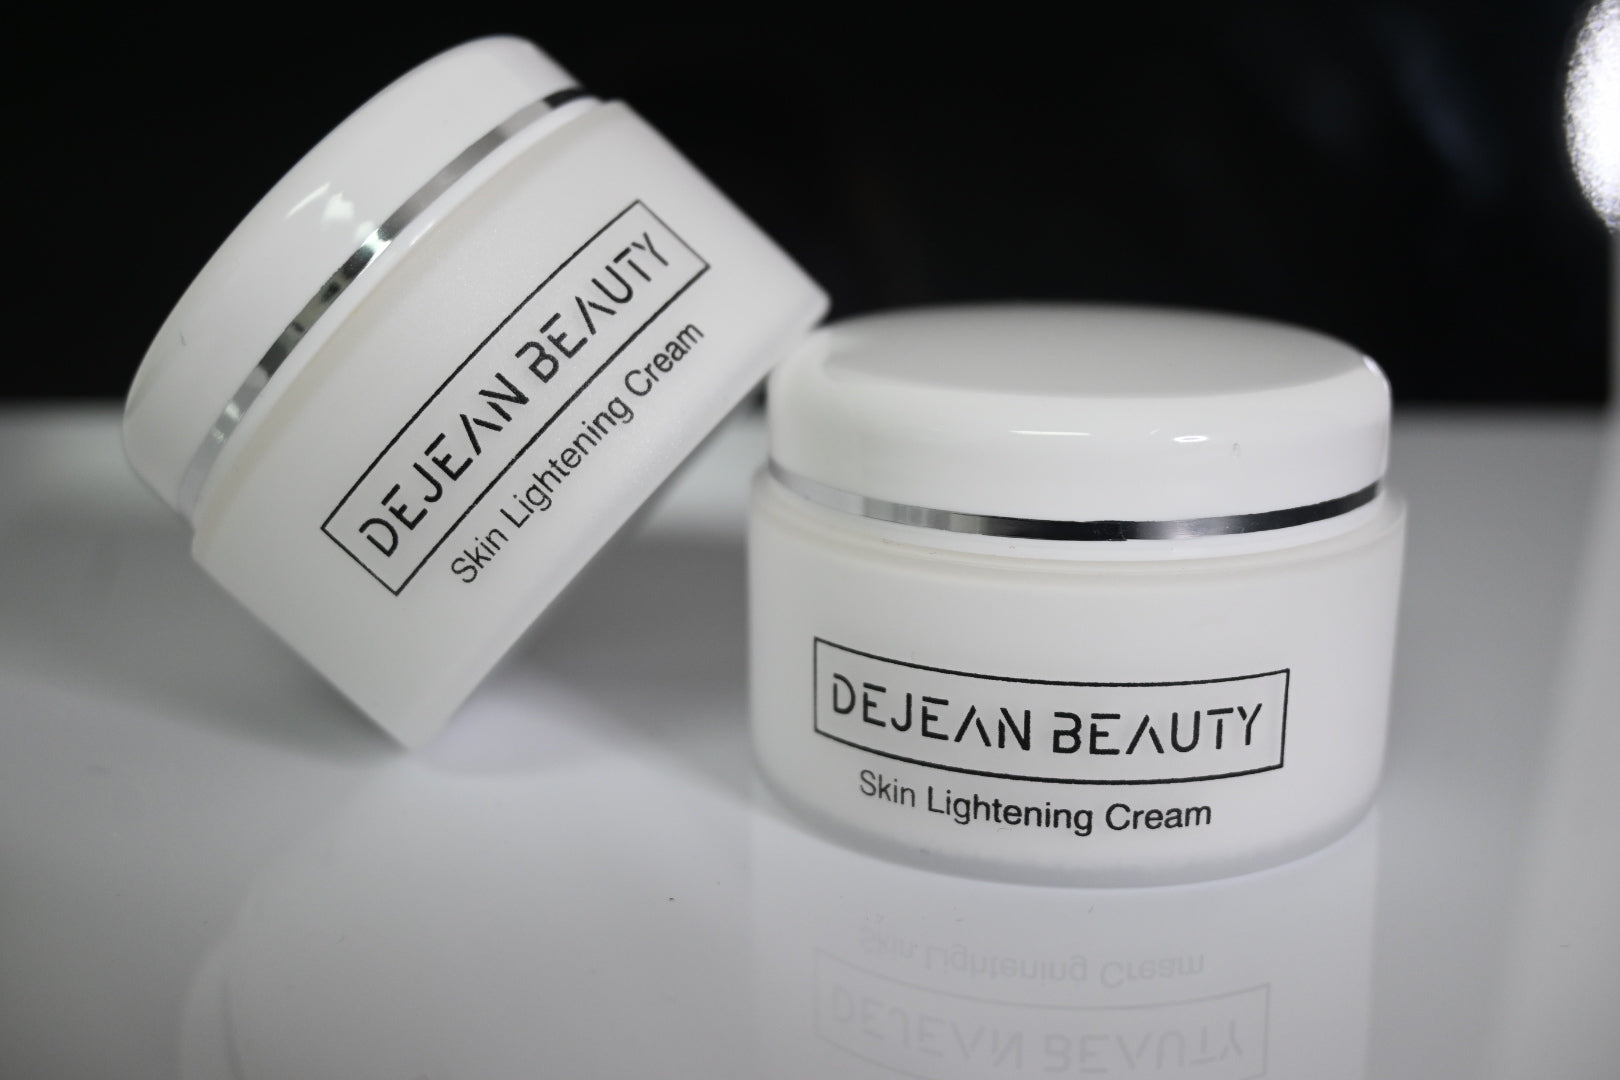 Wait! Get 2 additional creams now for only $55!